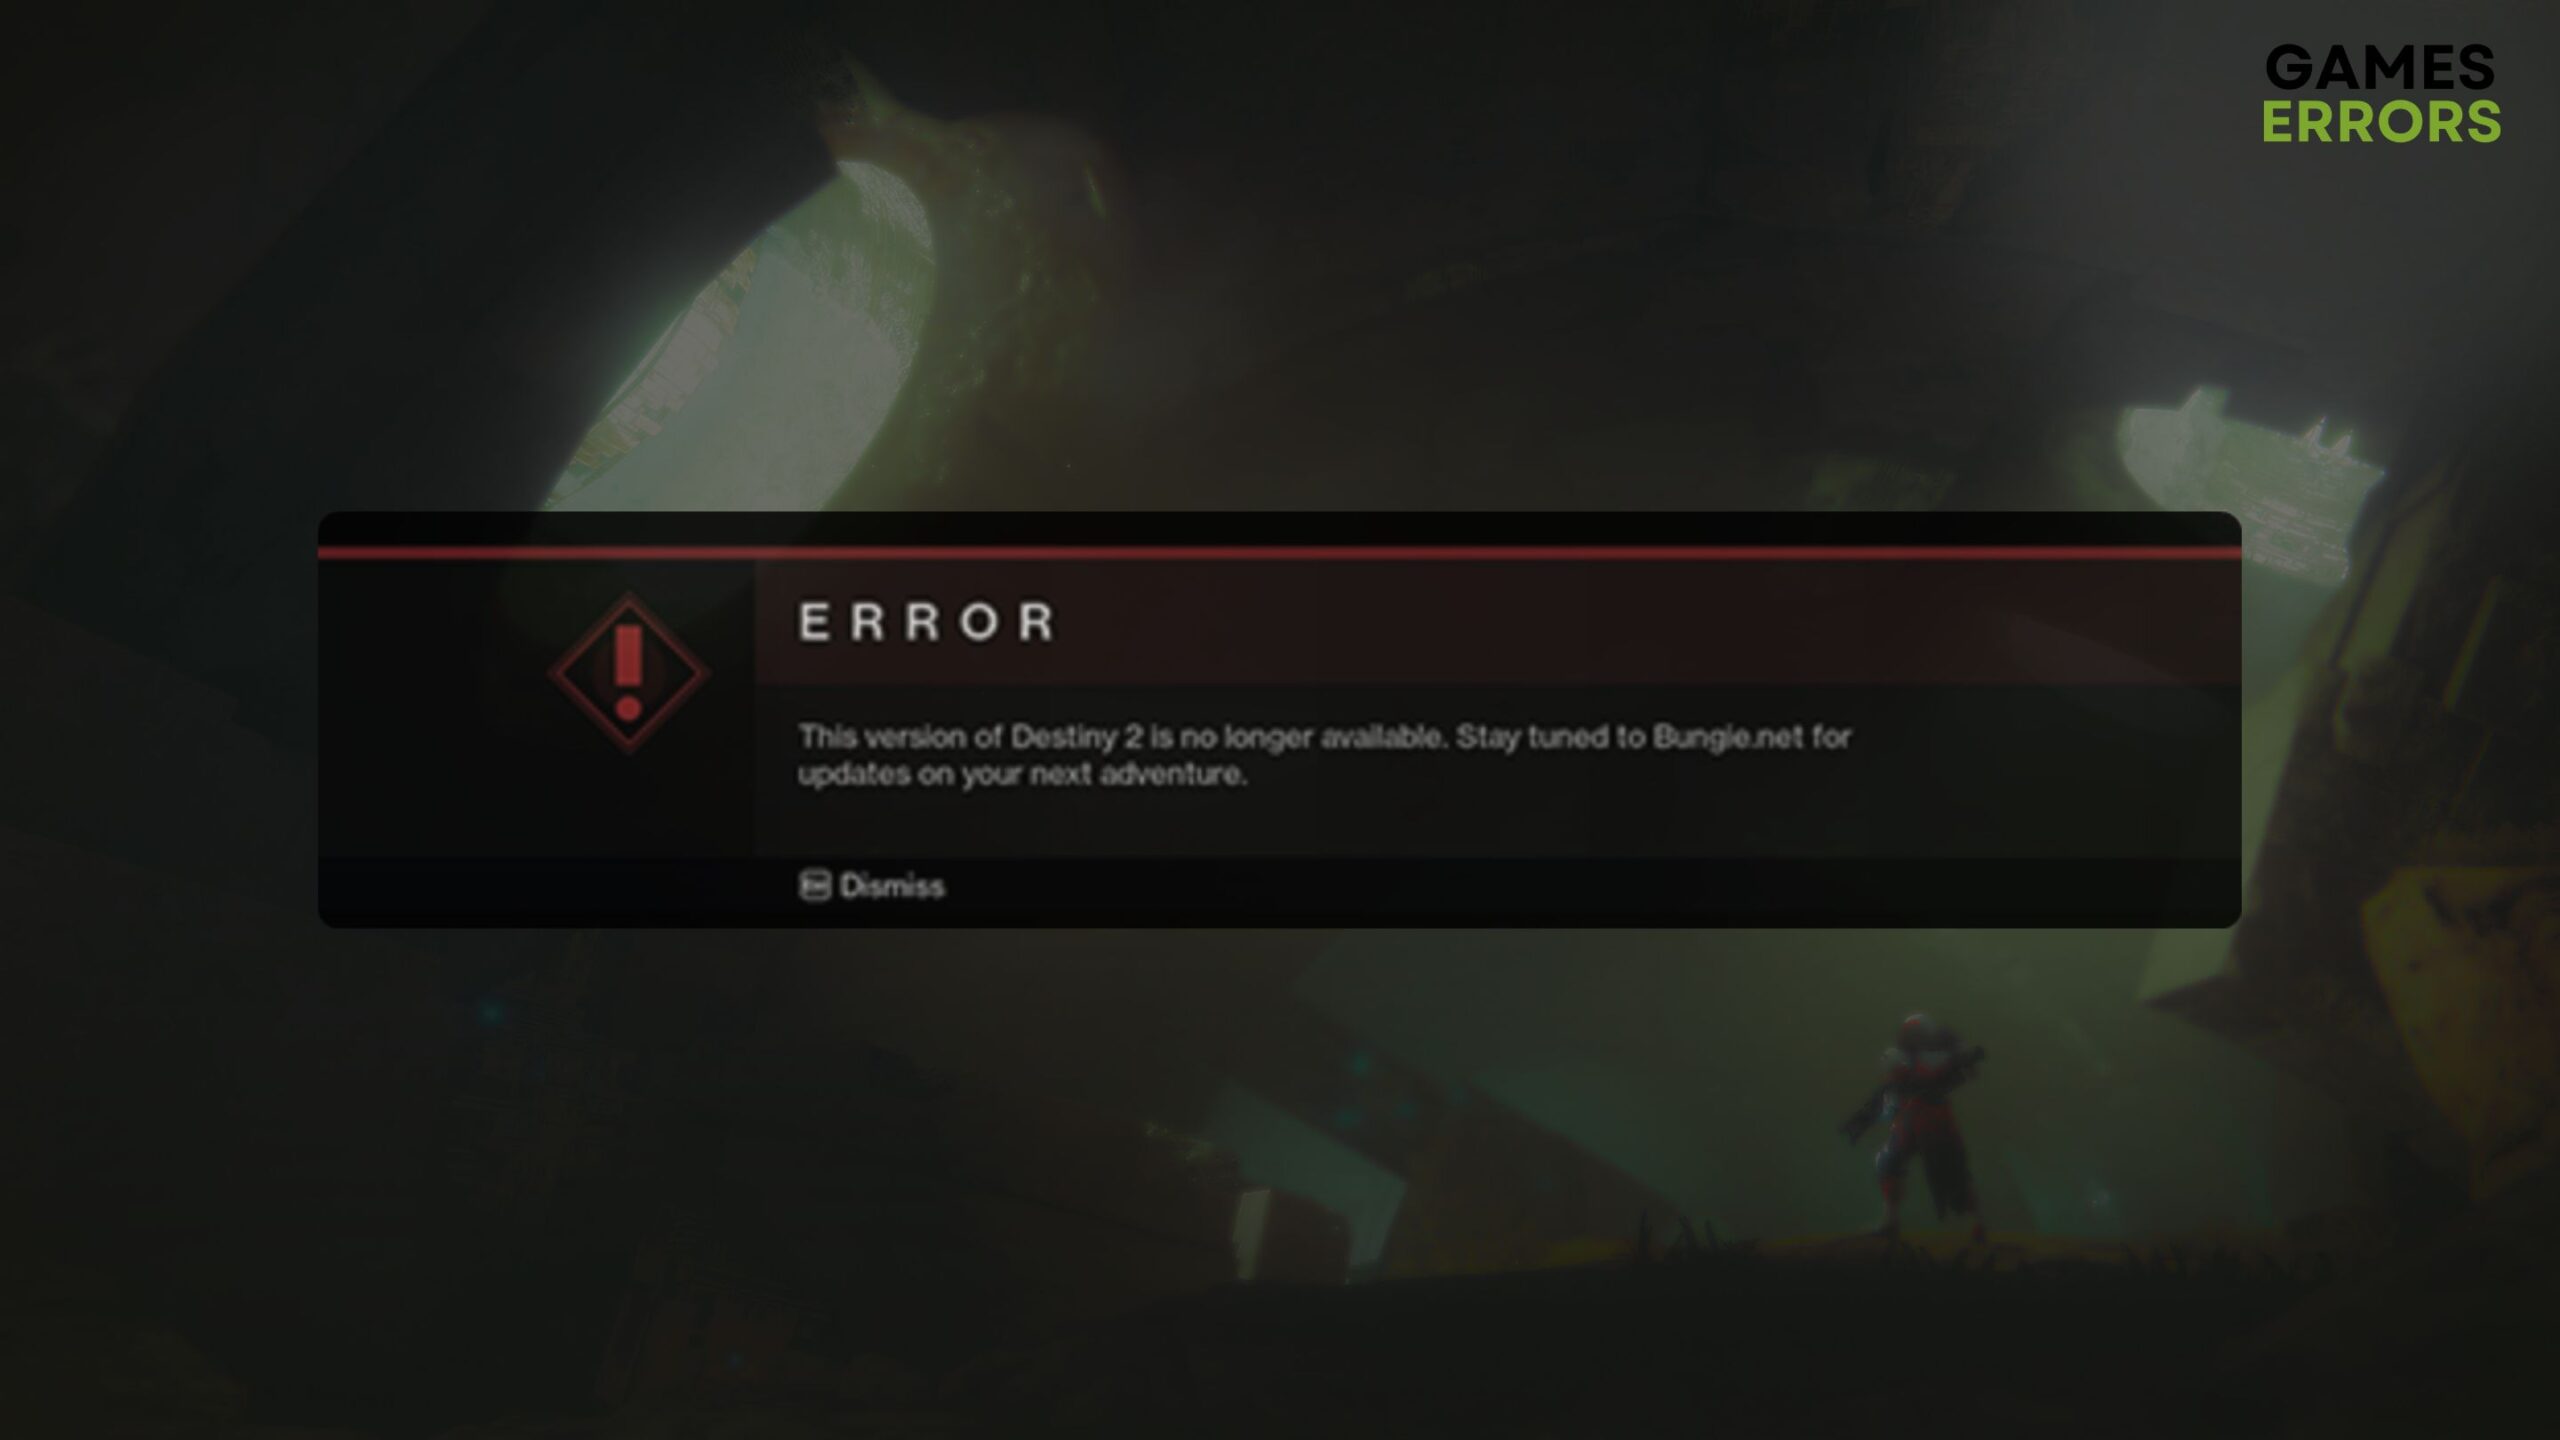 Update Game and Drivers: Stay up to date with the latest game updates and ensure your device's drivers are also updated to avoid encountering this error.
Contact Bungie Support: If all else fails, find out how to reach out to Bungie's support team for further assistance in resolving Destiny 2 Error Code Olive.